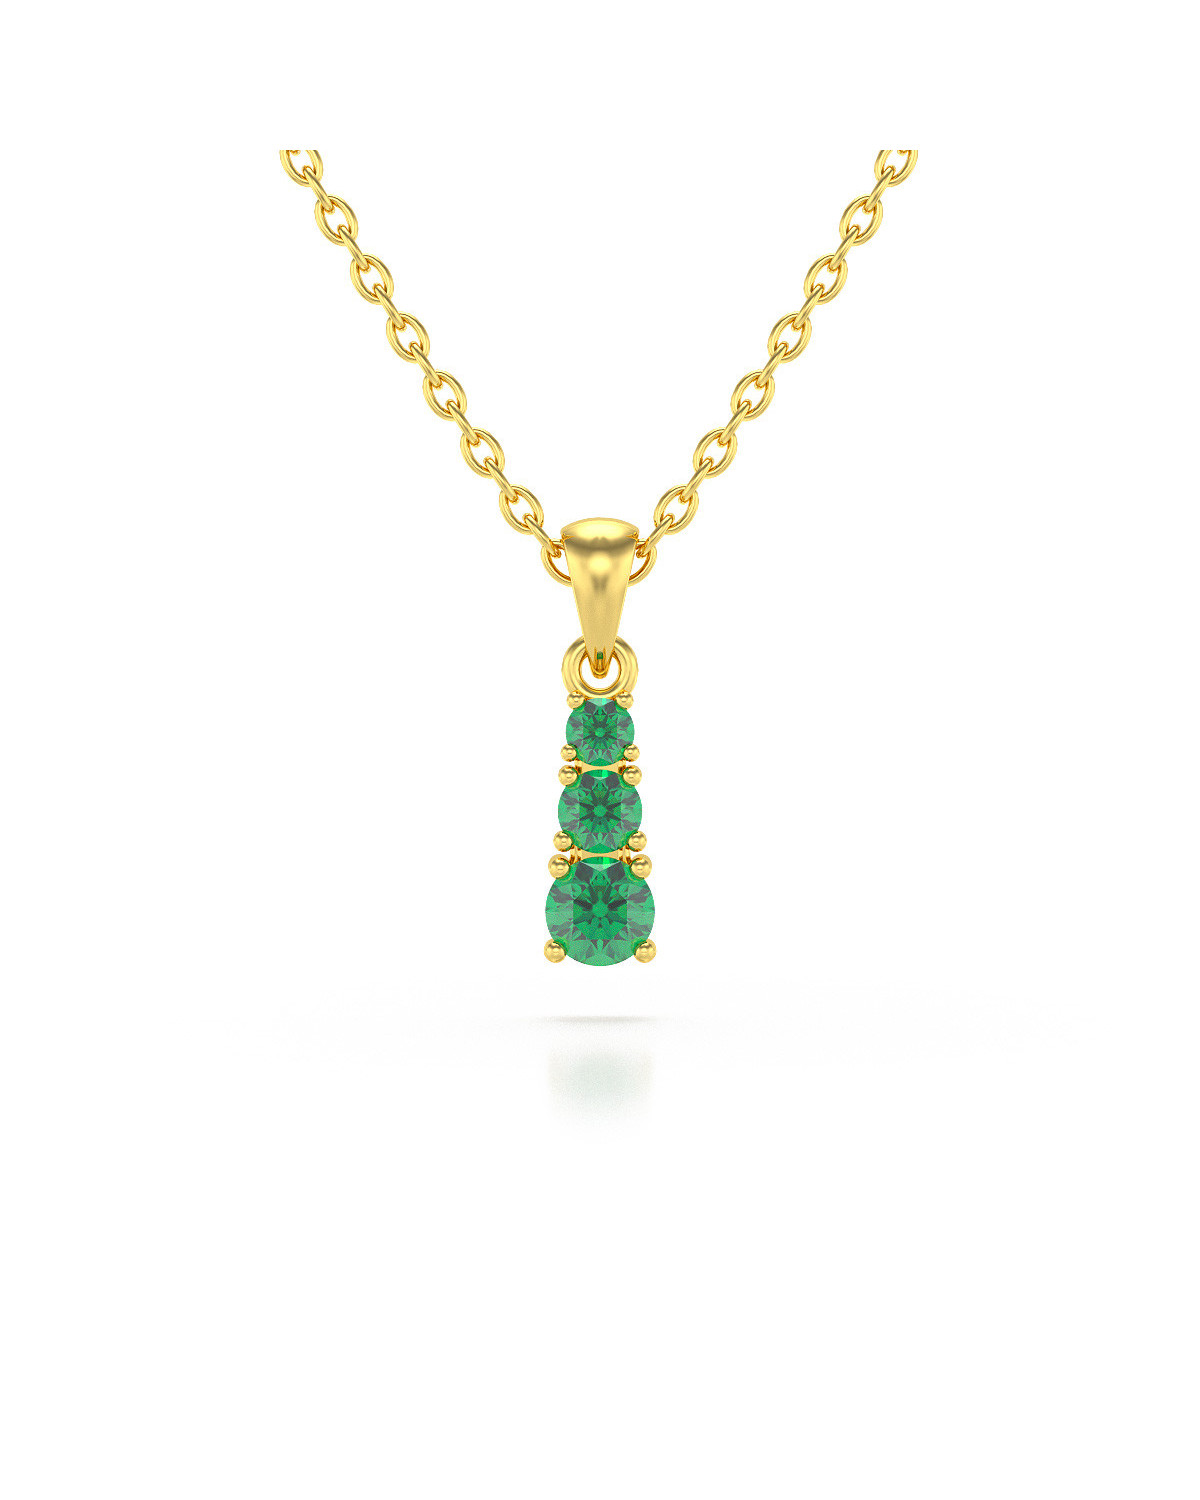 14K Gold Emerald Necklace Pendant Gold Chain included